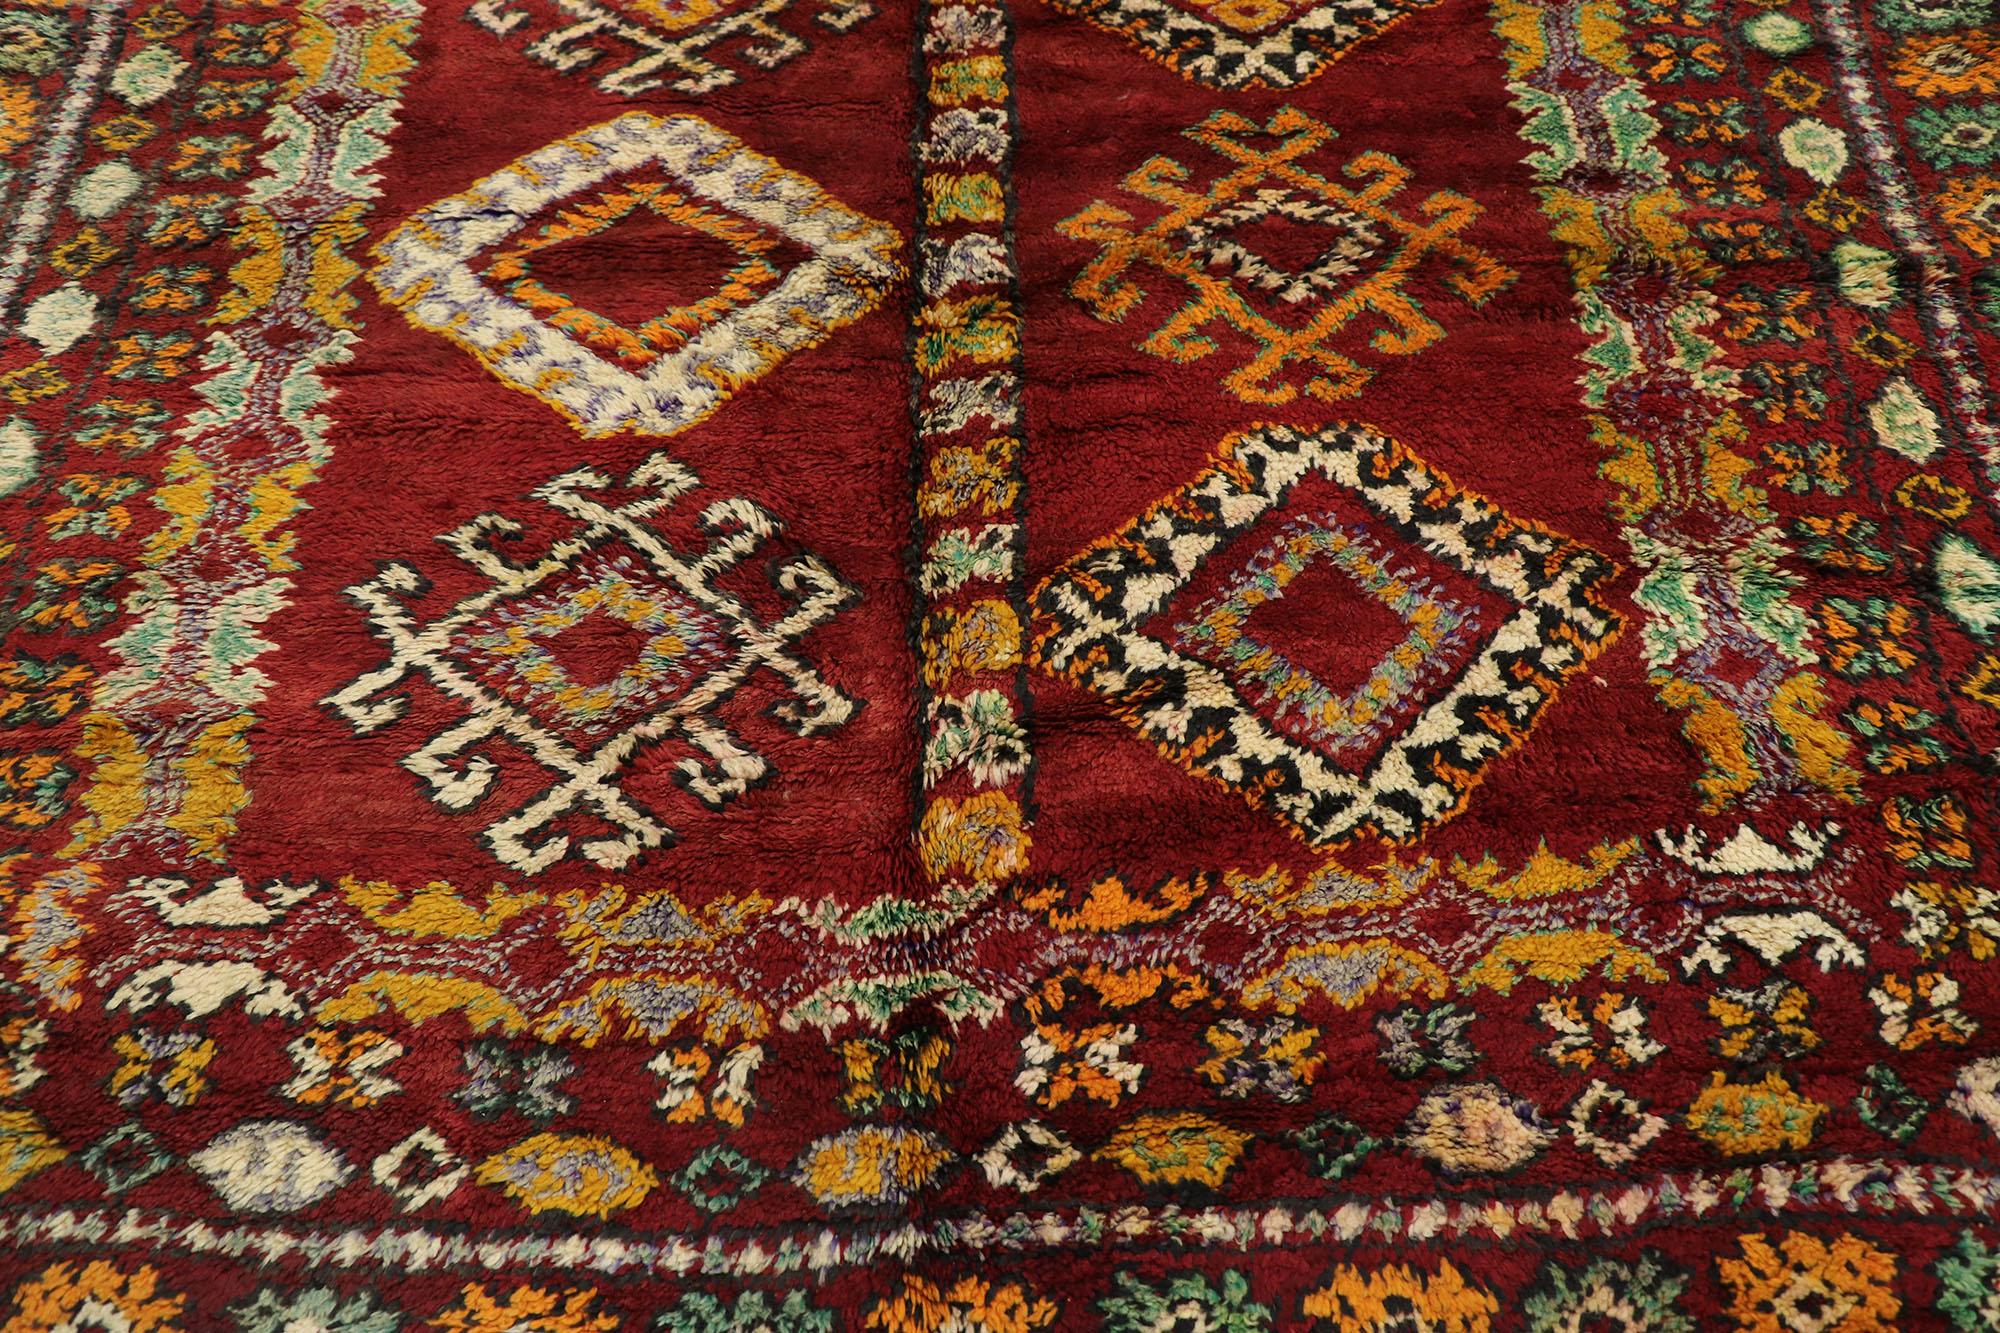 Vintage Beni M'guild Moroccan Rug with Tribal Style In Good Condition For Sale In Dallas, TX